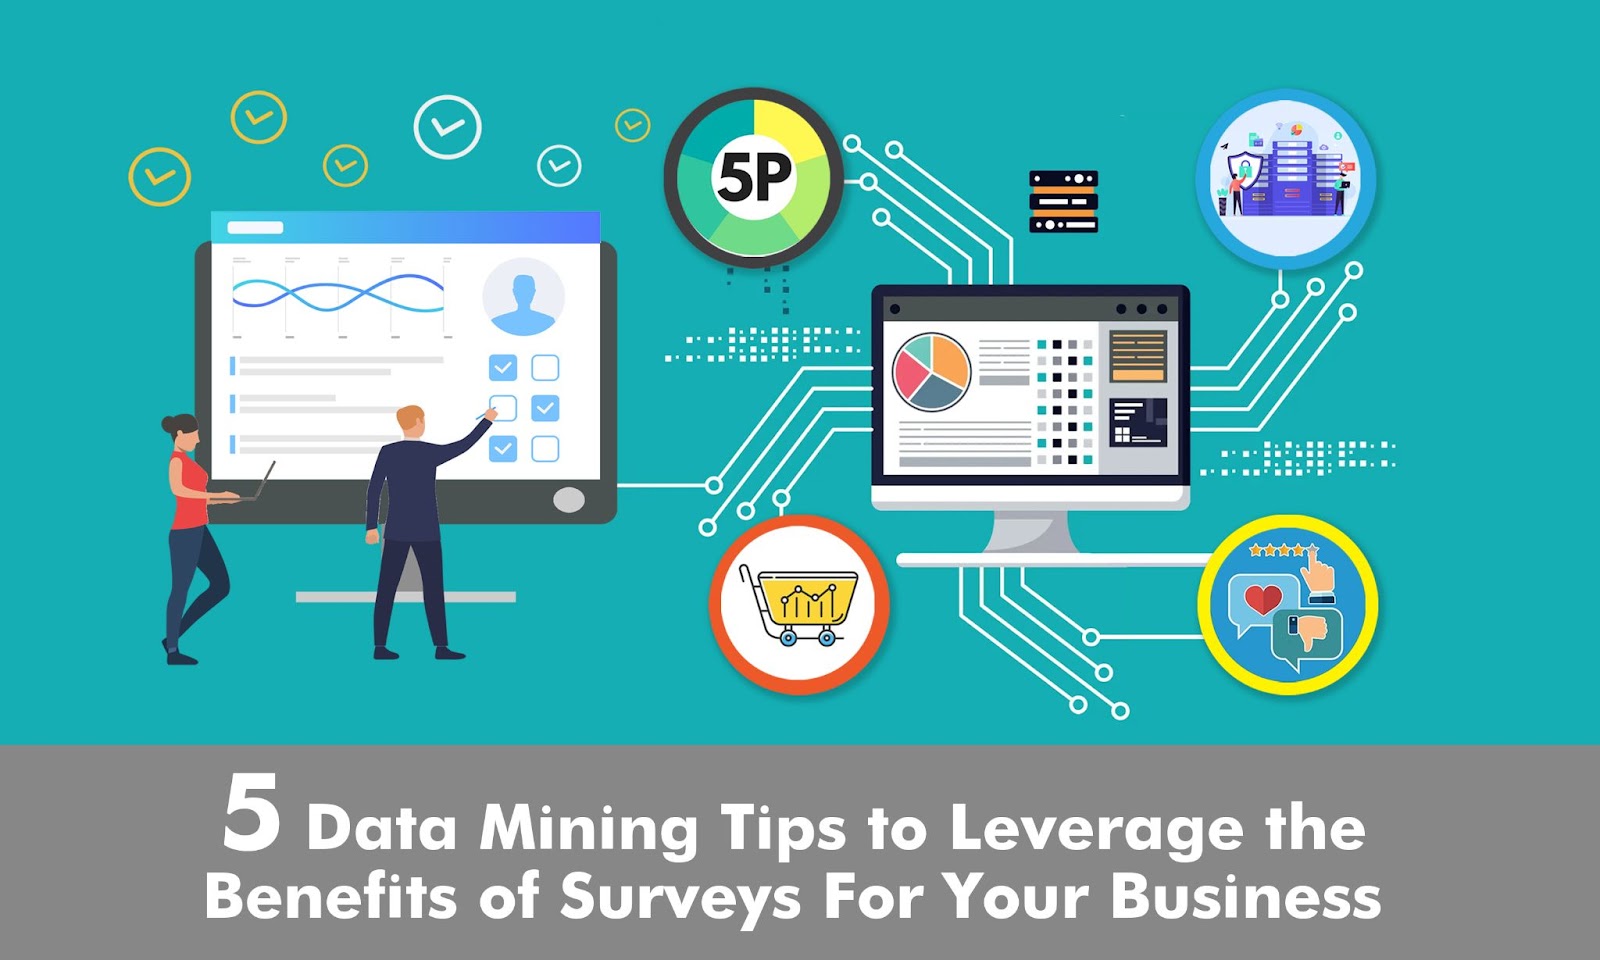 5 Data Mining Tips to Leverage the Benefits of Surveys For Your Business